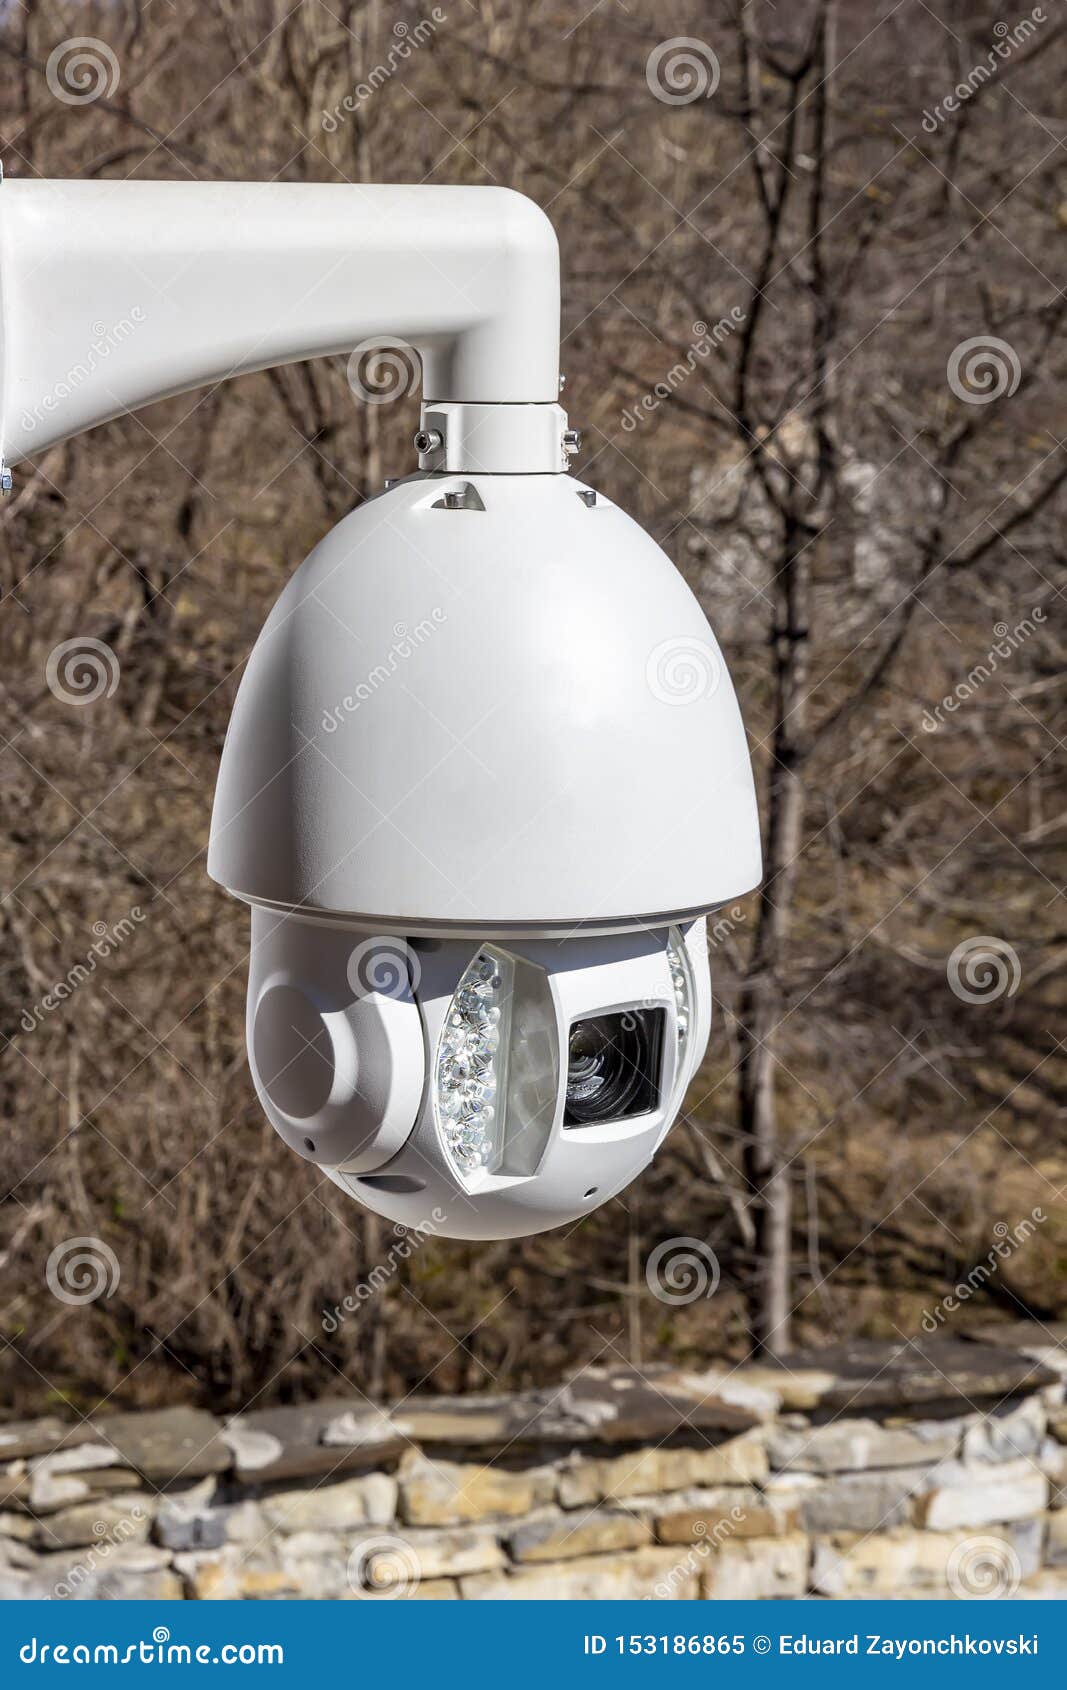 A Security Cctv Camera Outside At The Backyard Stock Image Image Of Private Closeup 153186865